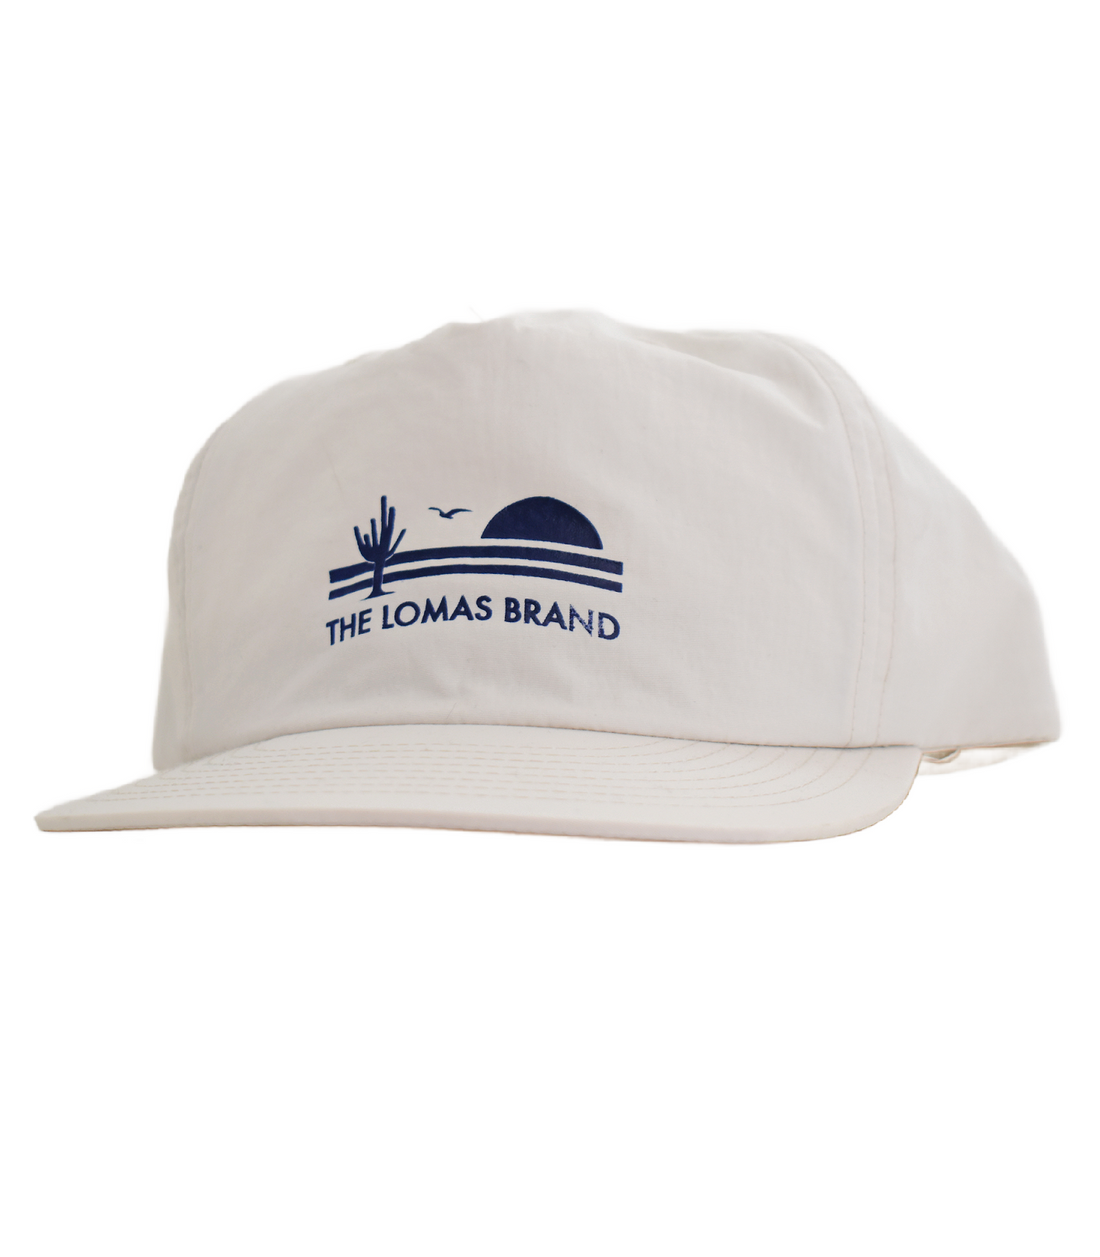 White baseball cap with a navy blue embroidered logo on the front. The logo shows a sunset scene with a cactus and "THE LOMAS BRAND" text. The cap is photographed straight-on against a white background.